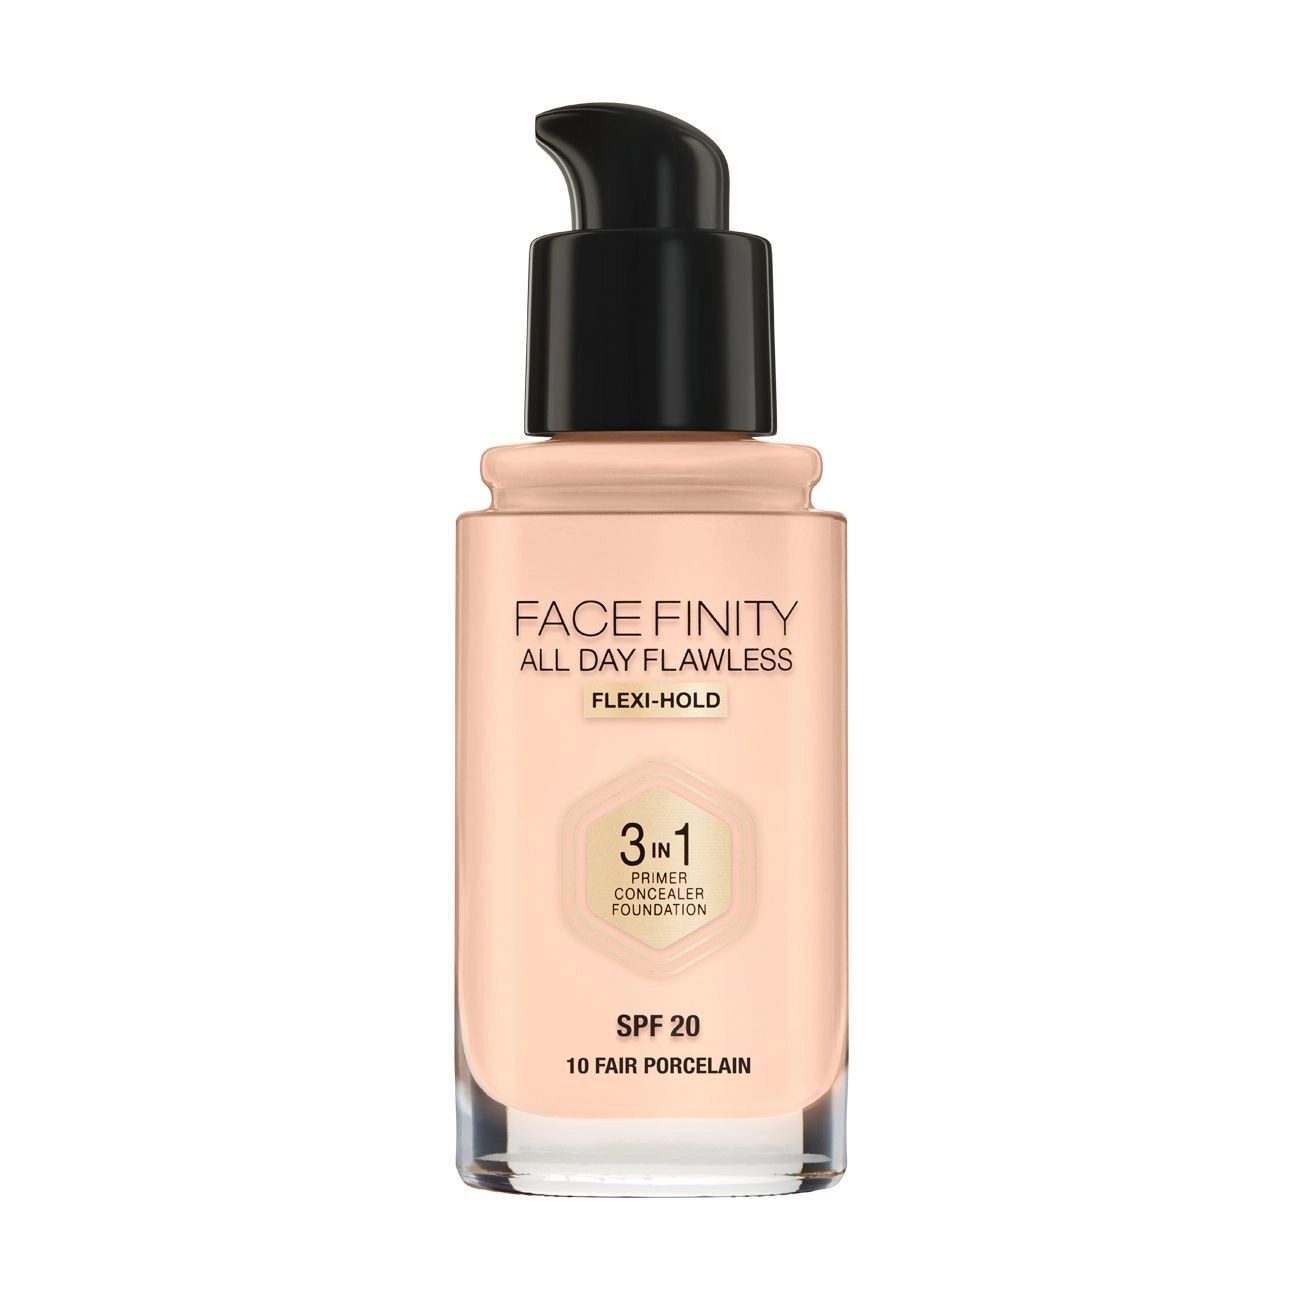 Max Factor Тональна основа Facefinity All Day Flawless 3-in-1 Foundation SPF 20 10 Fair Porcelain 30 мл - фото N2